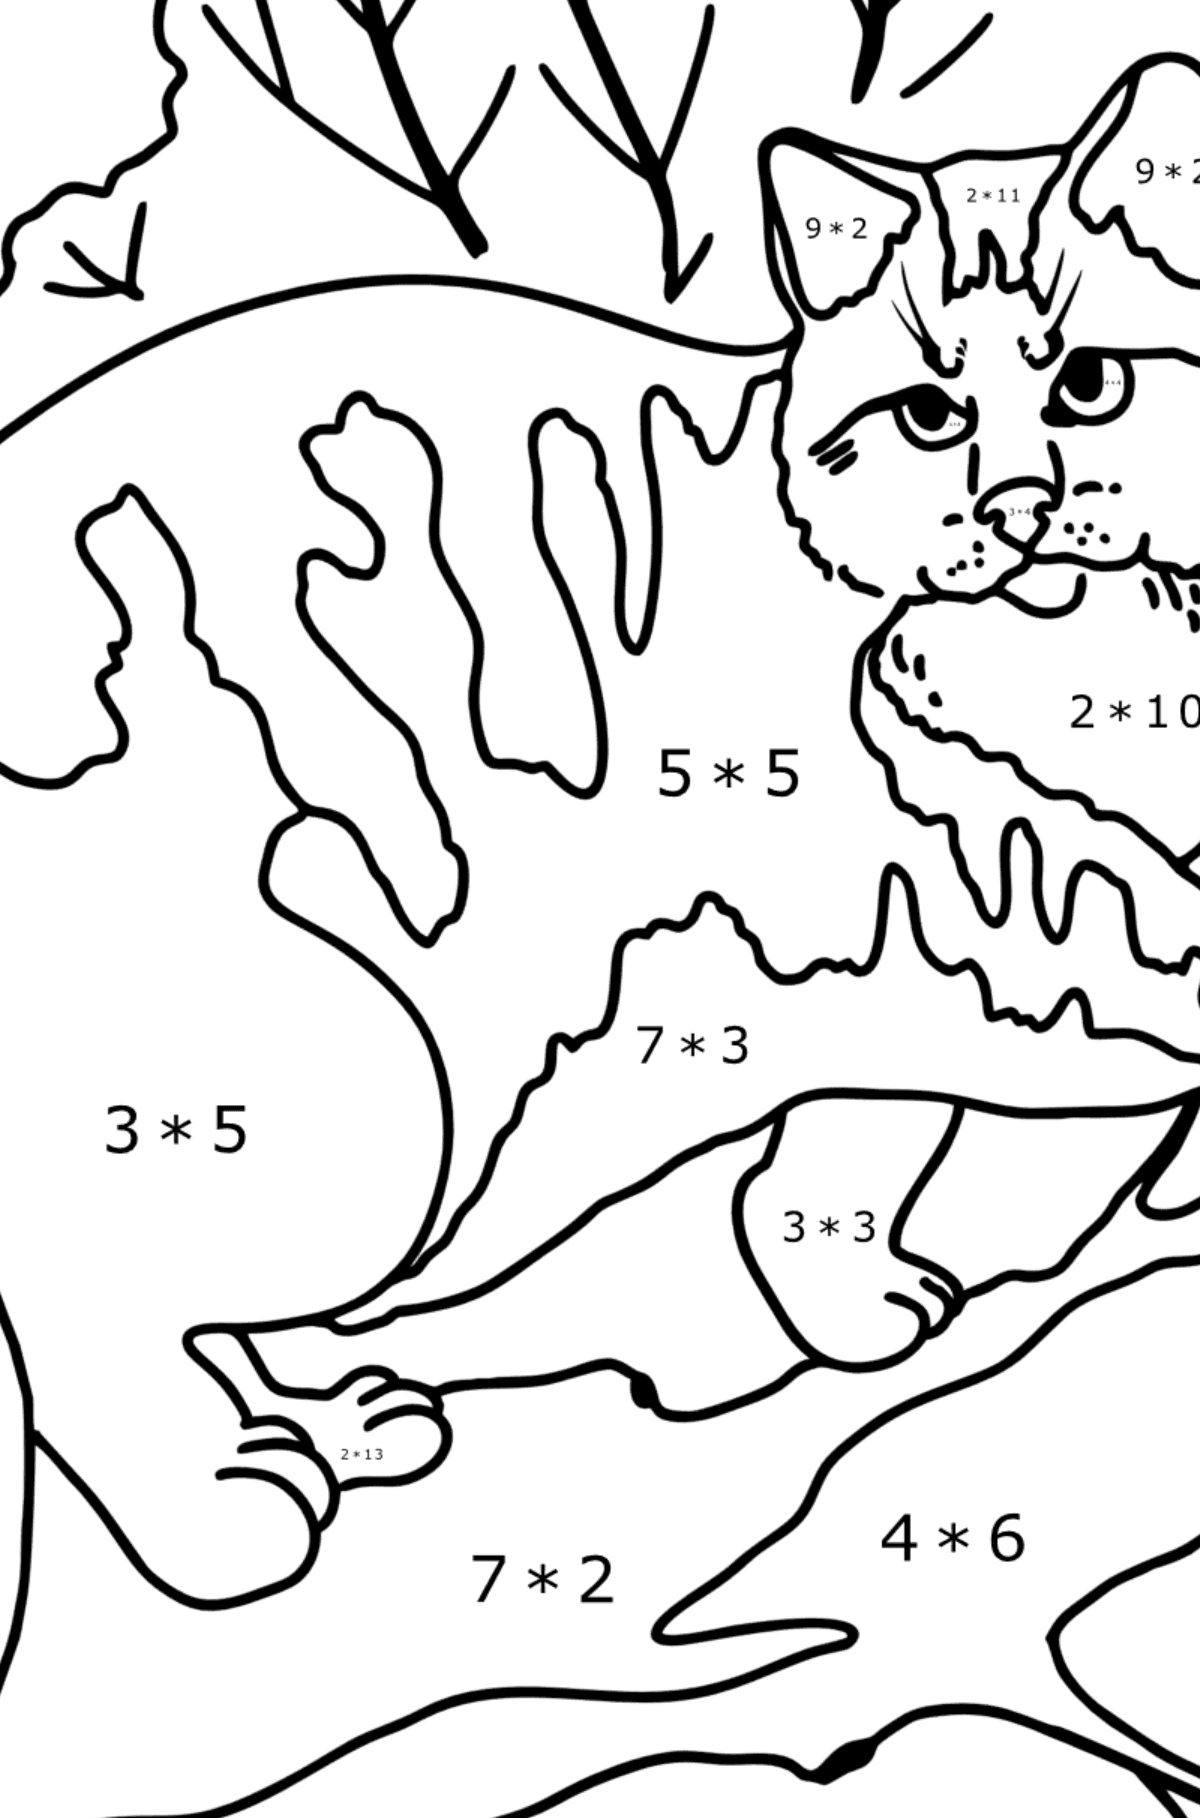 Wild Forest Cat coloring page - Math Coloring - Multiplication for Kids